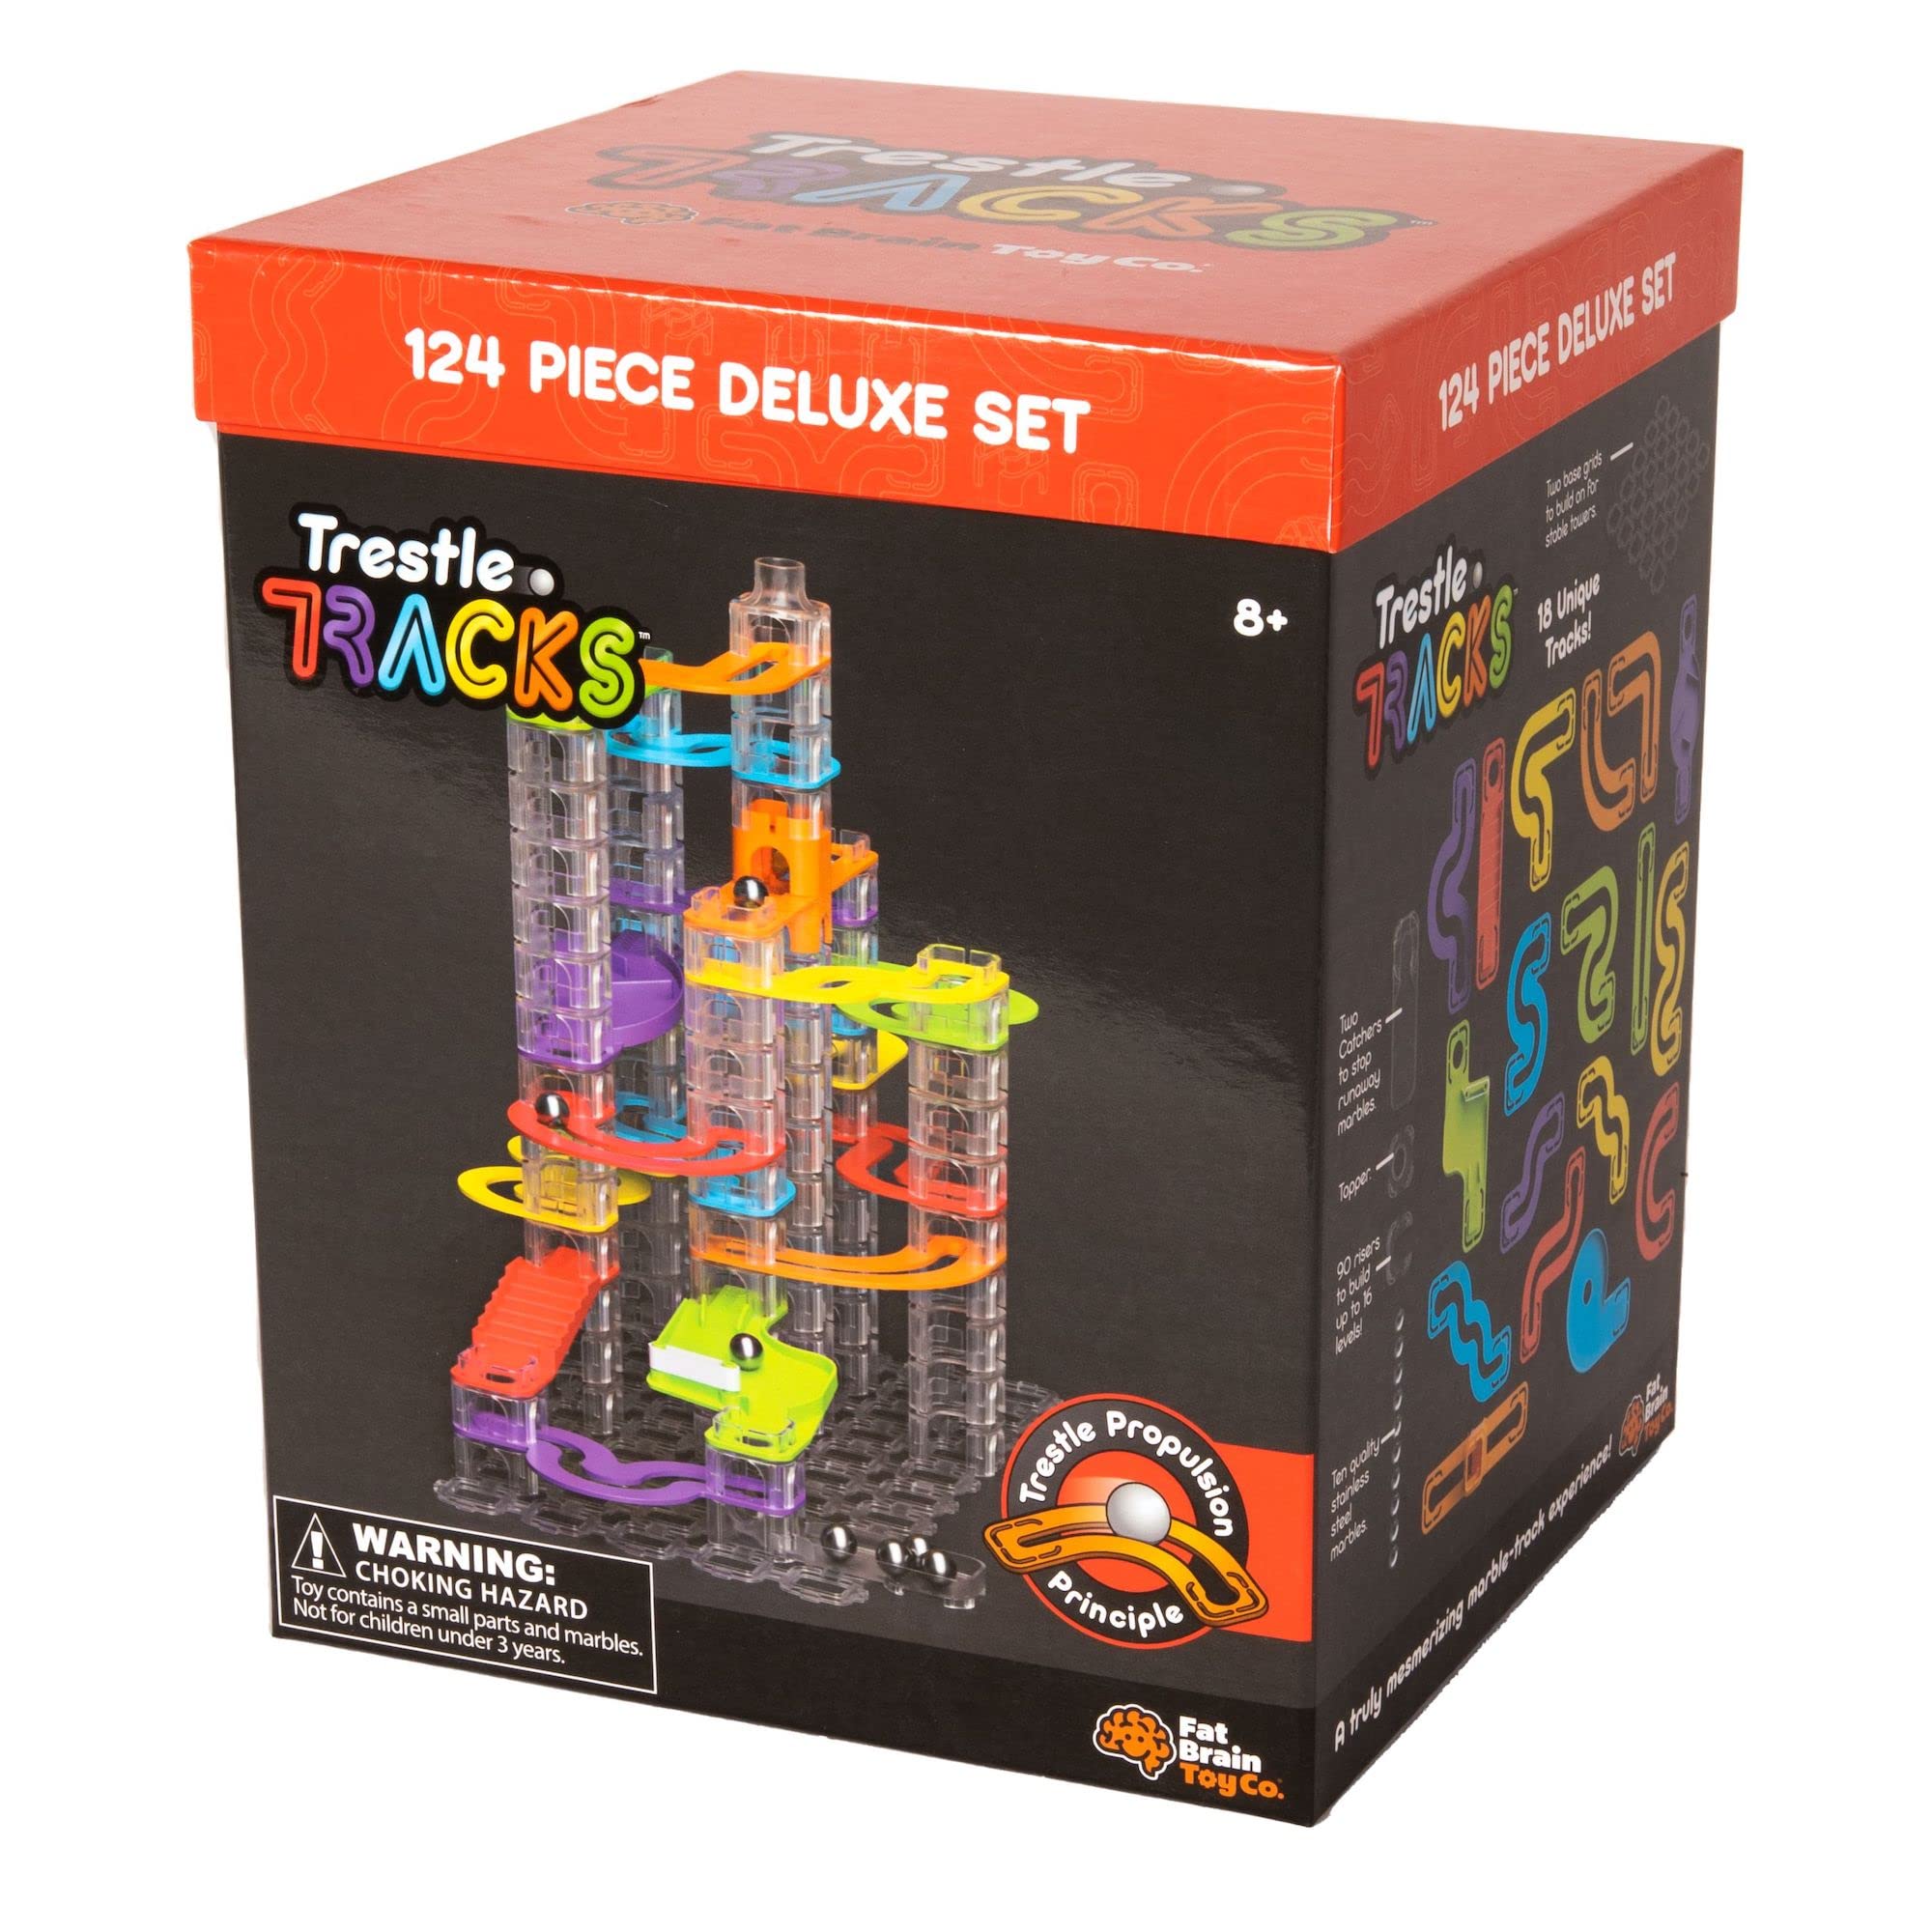 Fat Brain Toys Trestle Tracks Deluxe Set Building & Construction for Ages 8 to 10